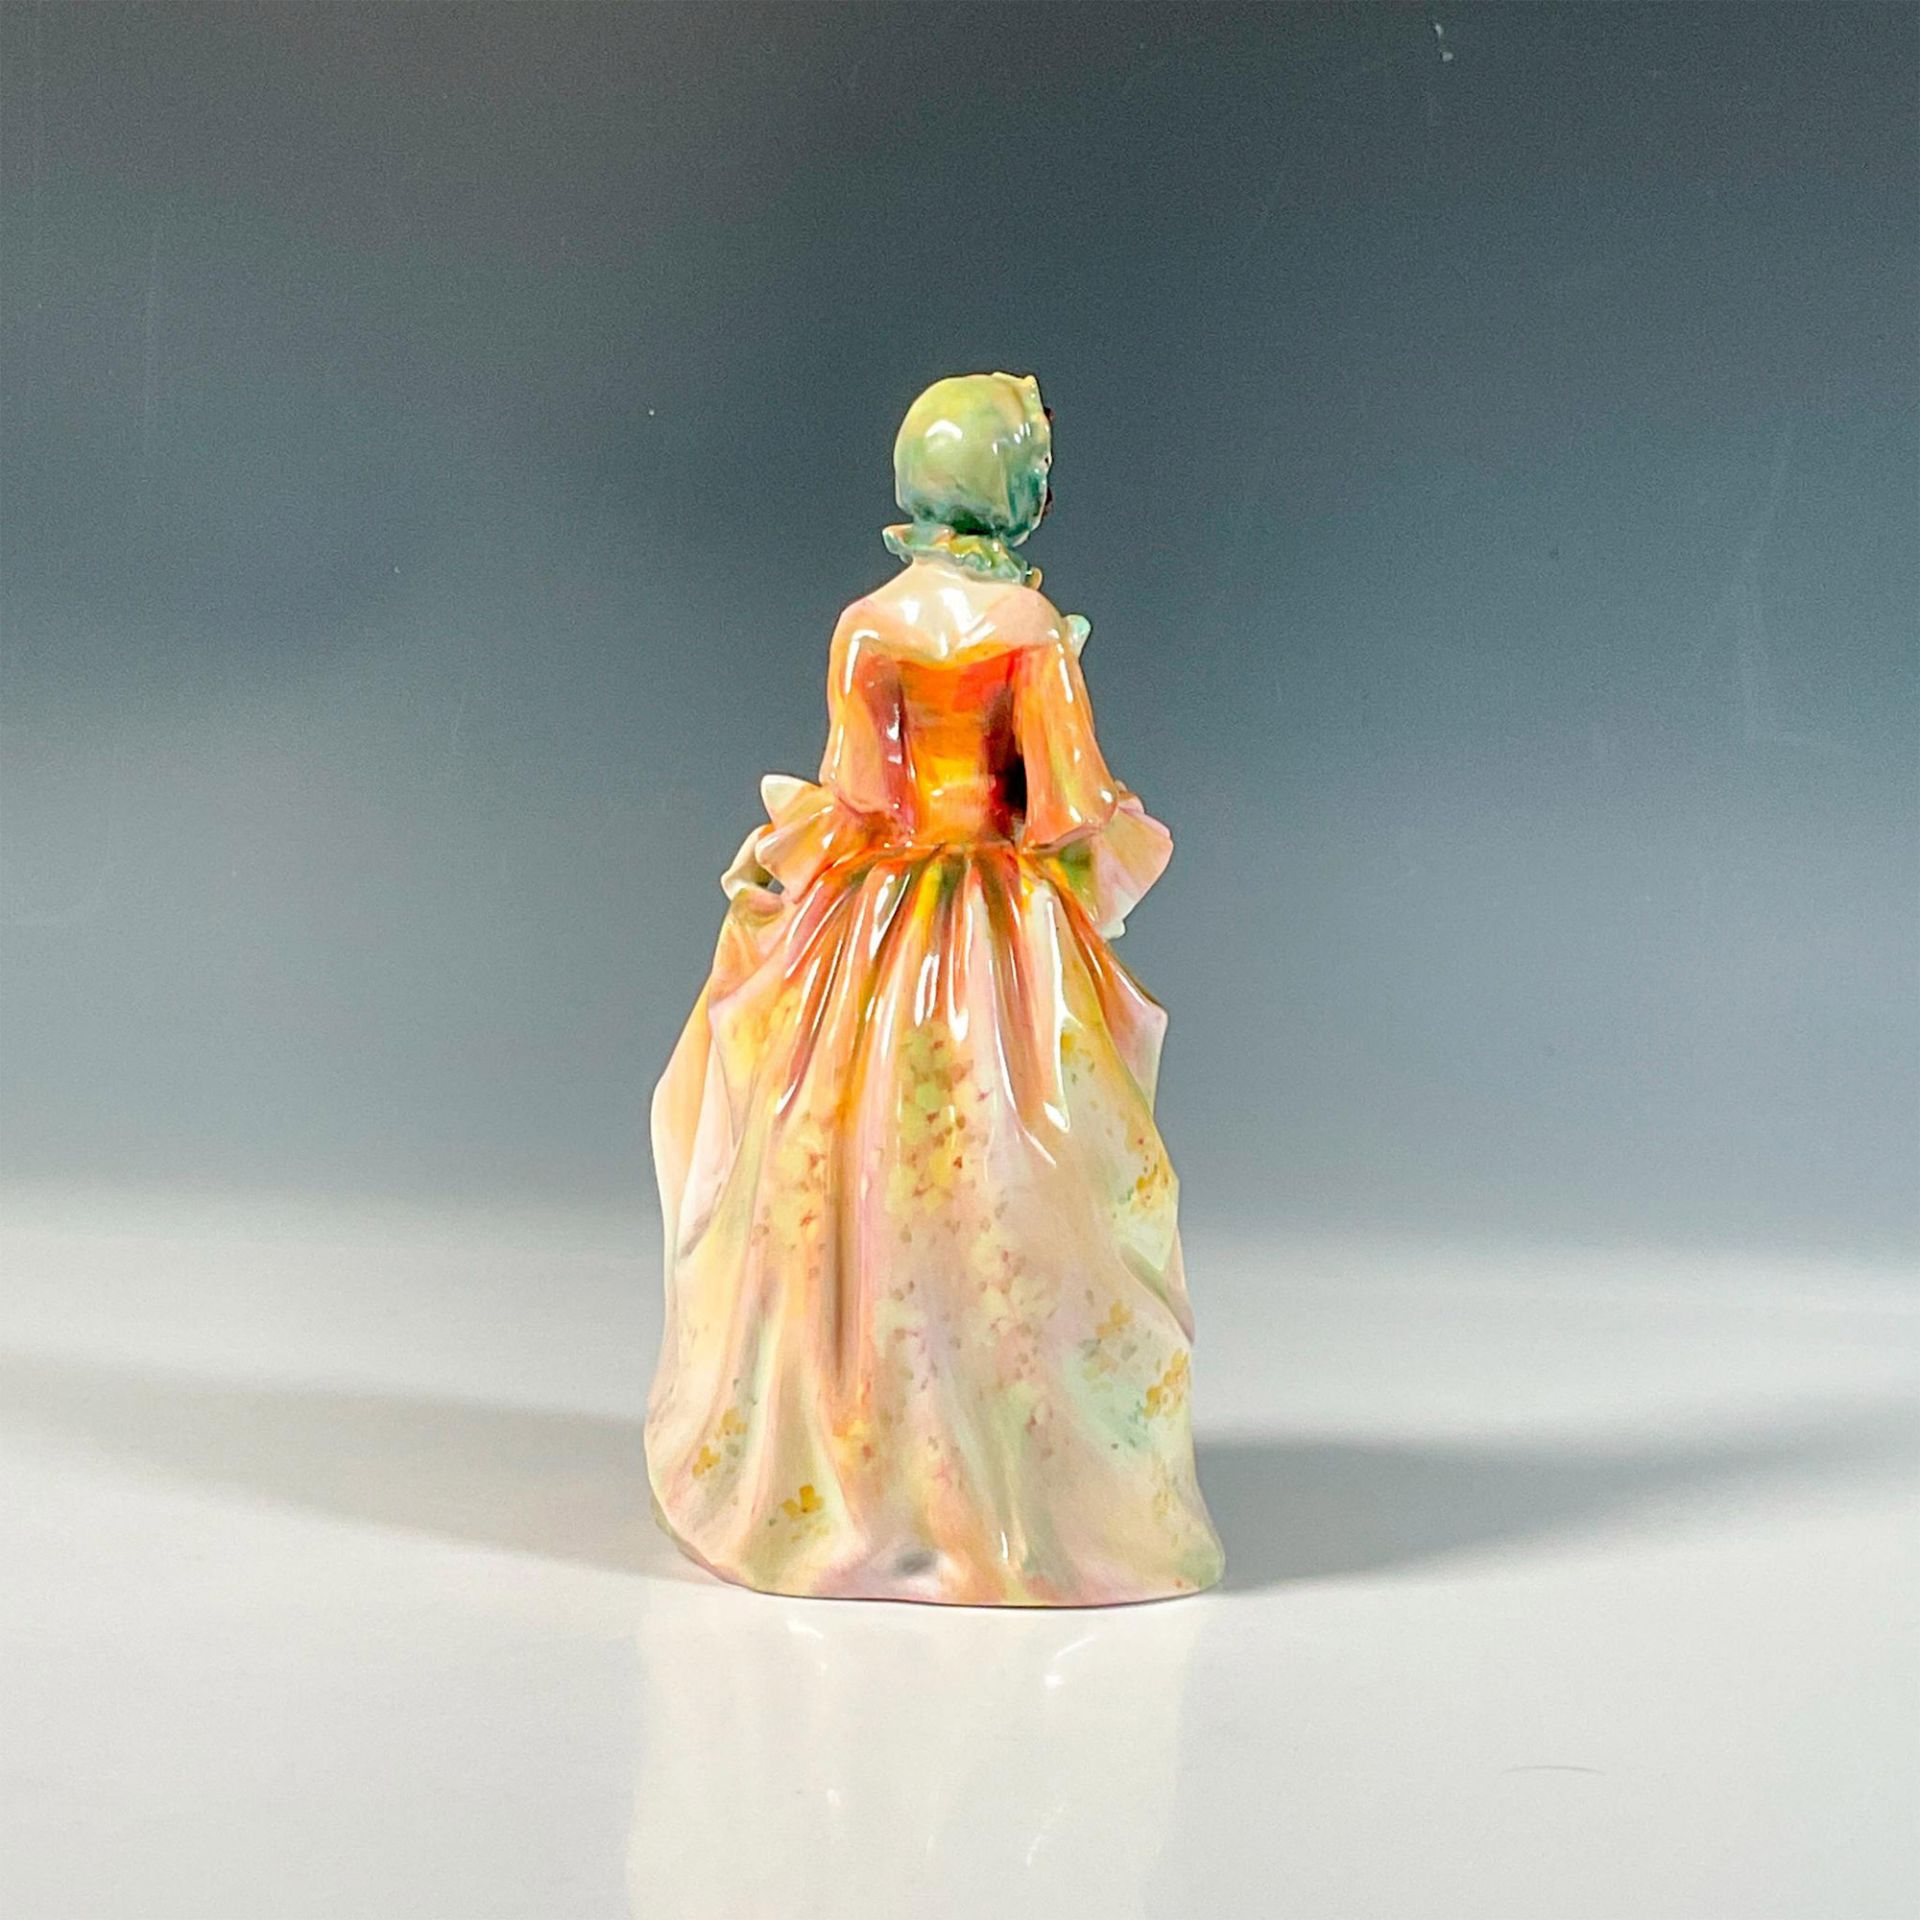 Suzette HN1585 Extremely Rare Version - Royal Doulton Figurine - Image 2 of 3